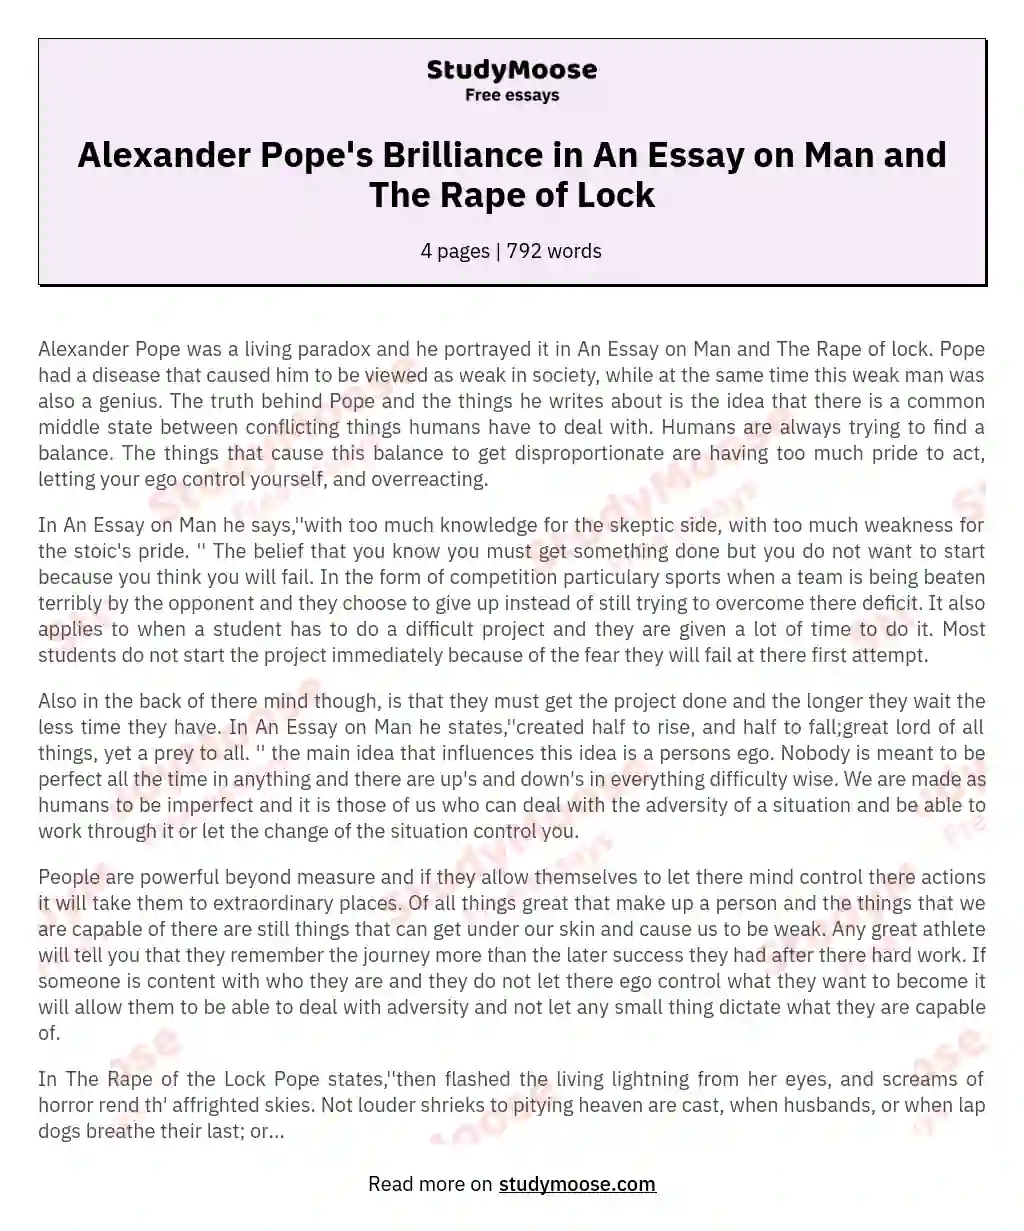 Alexander Pope's Brilliance in An Essay on Man and The Rape of Lock essay